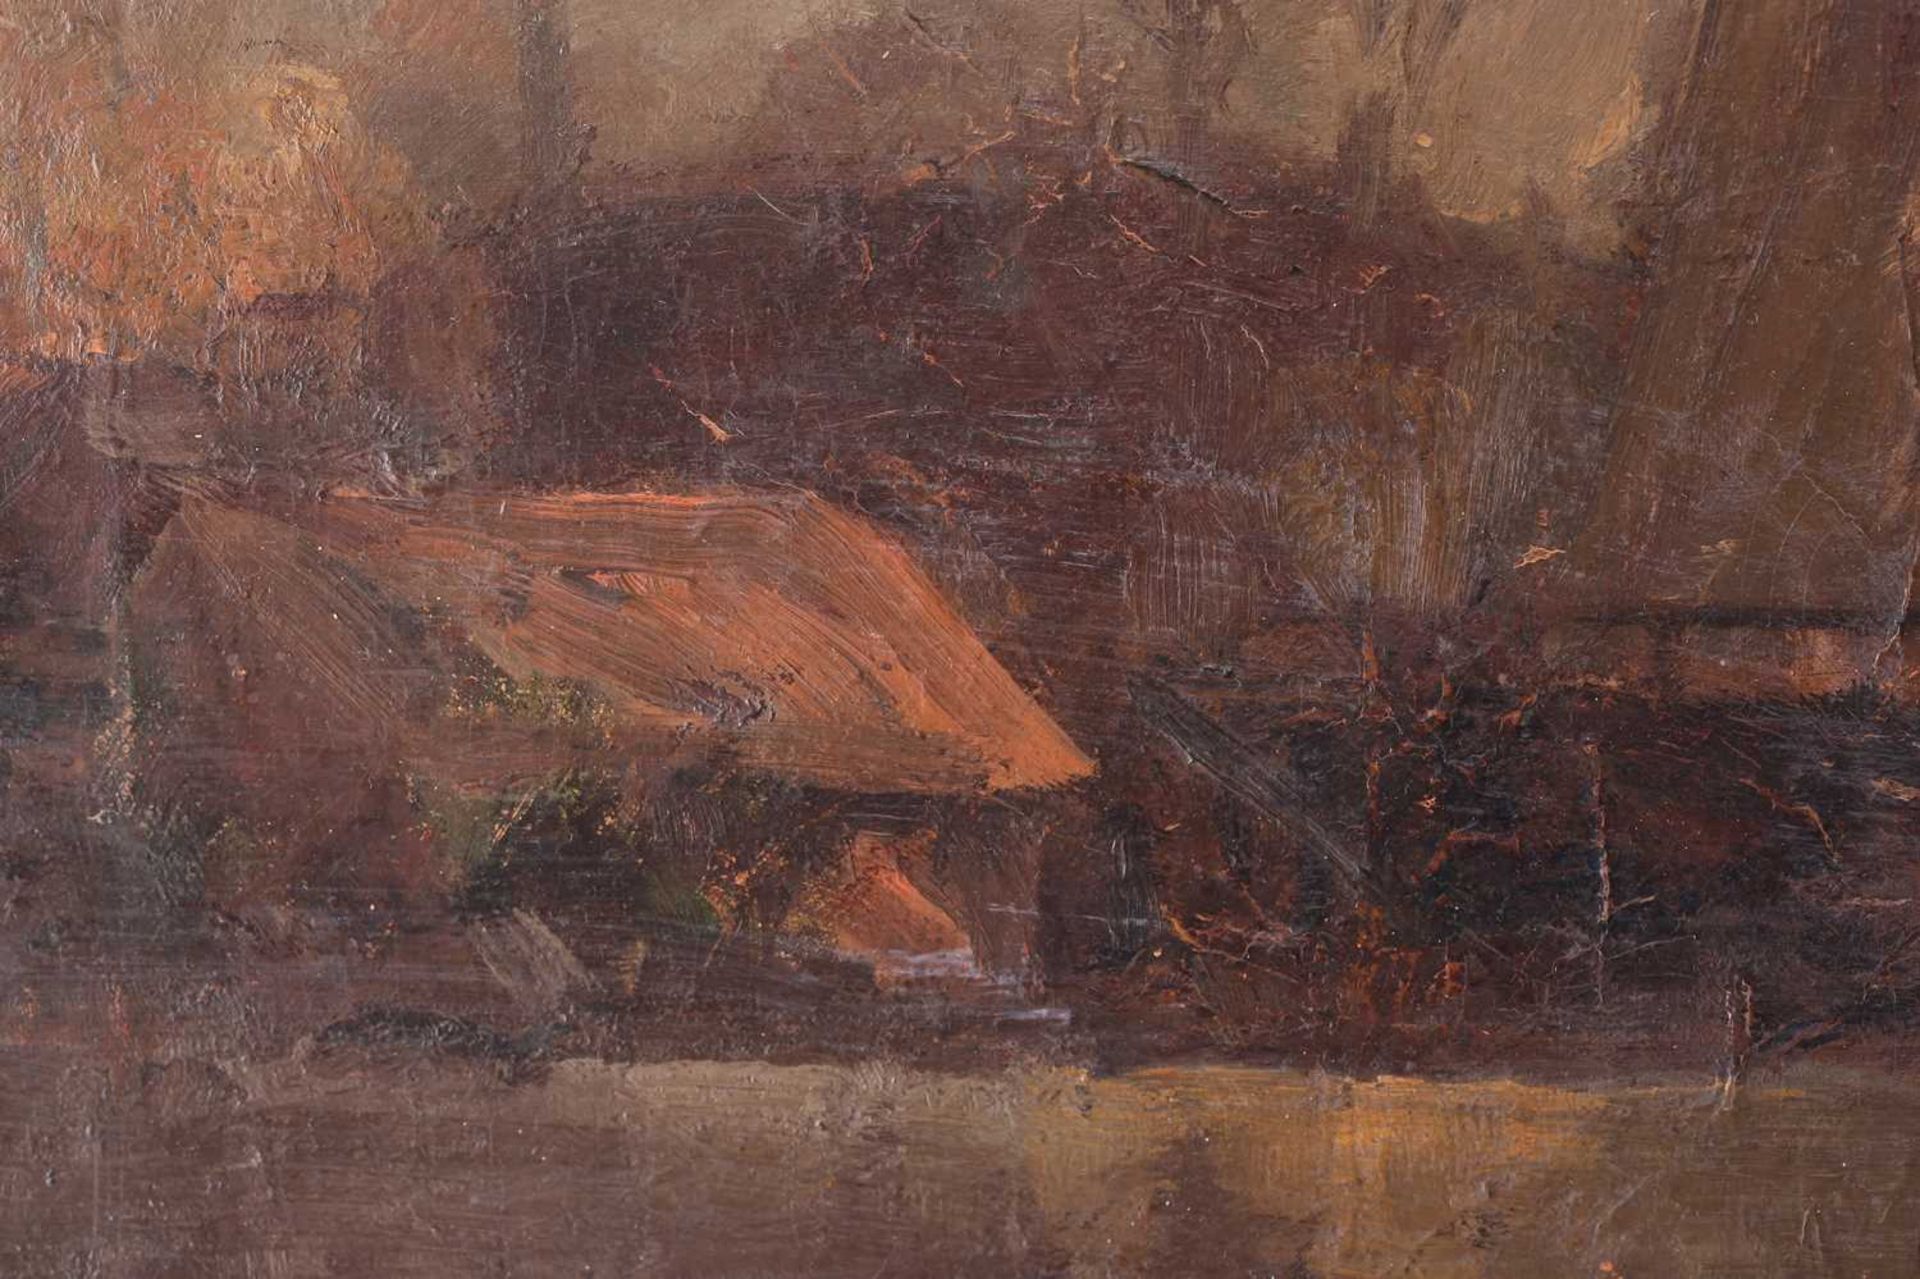 Frederick James Hackman (19th/20th century), 'The Mill, Rye', oil on canvas, mounted in an ornate - Image 12 of 22